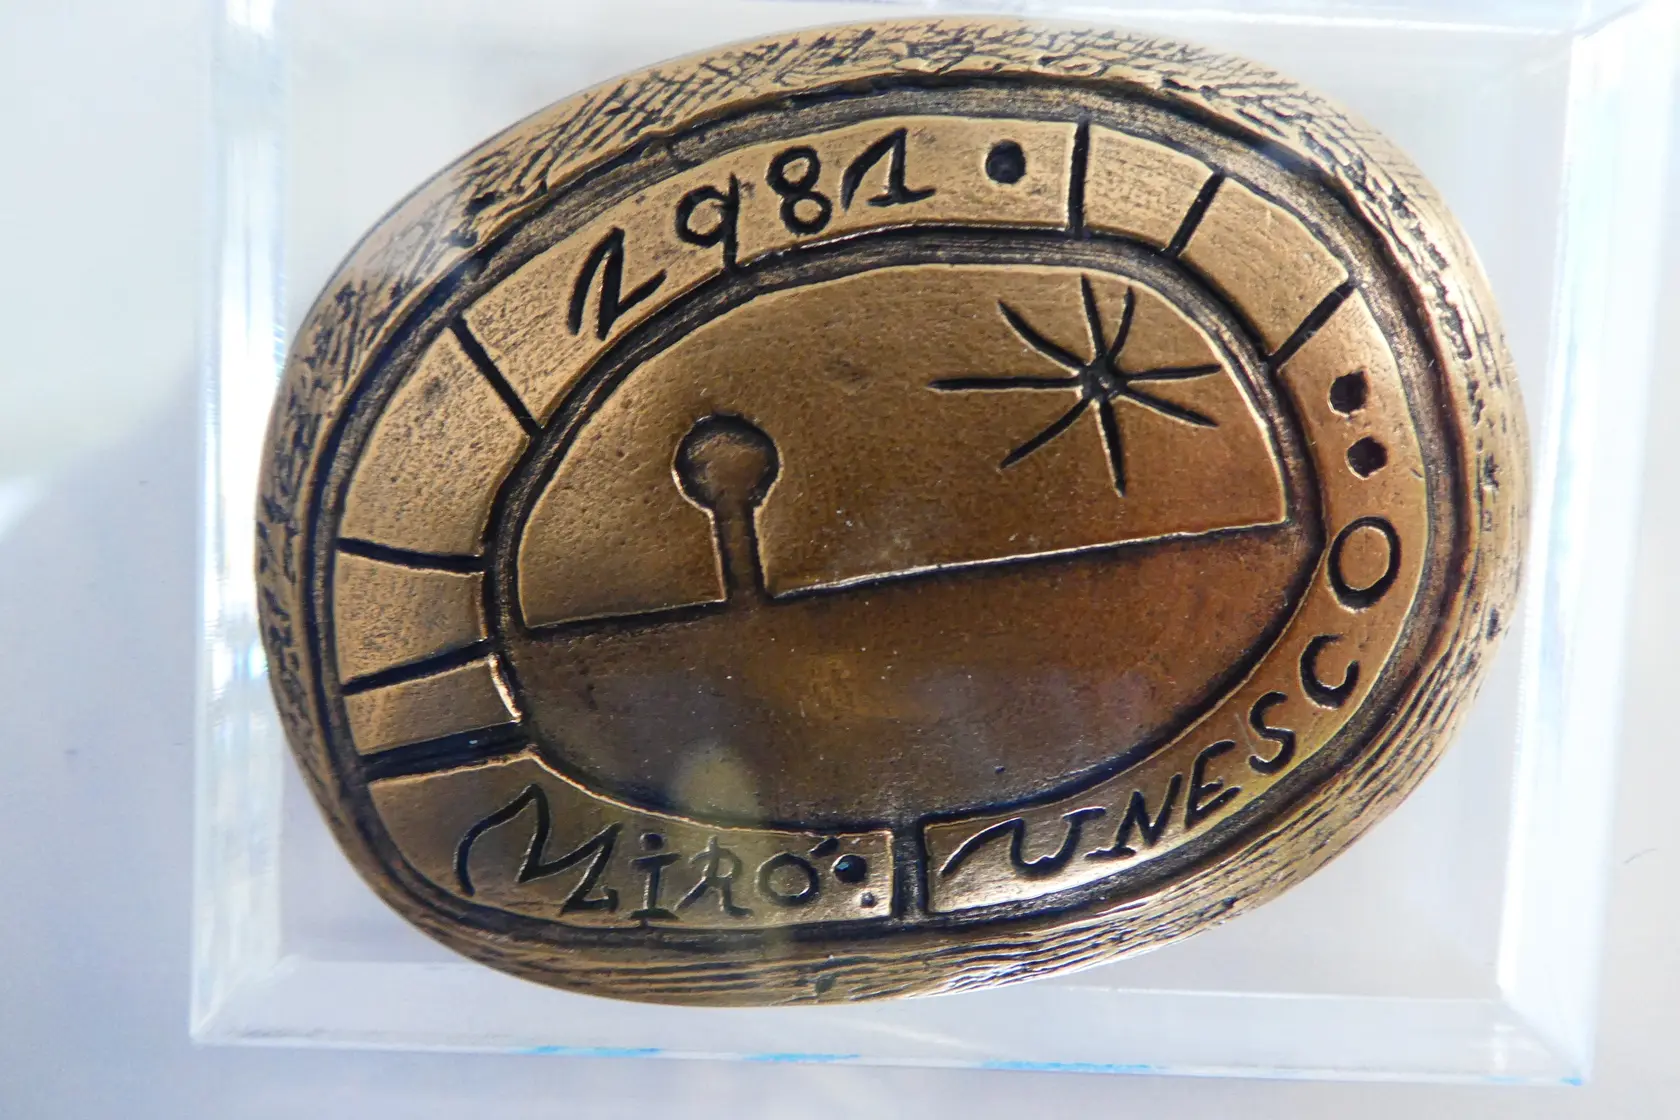 Commemorative medal made on the occasion of Pablo Picasso's birthday